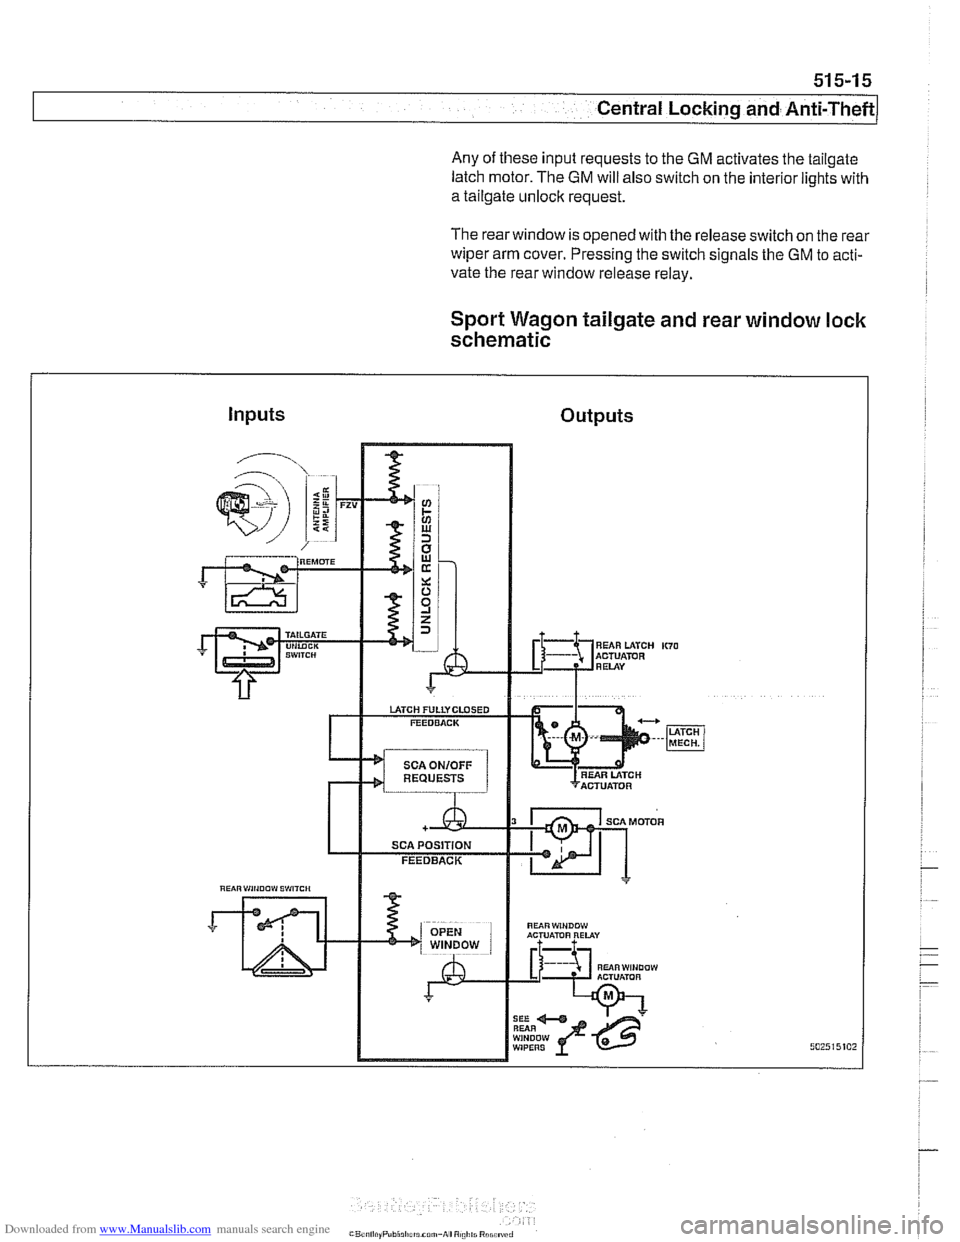 BMW 528i 1997 E39 Workshop Manual Downloaded from www.Manualslib.com manuals search engine 
51 5-1 5 
Central Locking and Anti-Theft 
Any  of these input requests to  the GM activates  the tailgate 
latch motor.  The 
GM will also swi